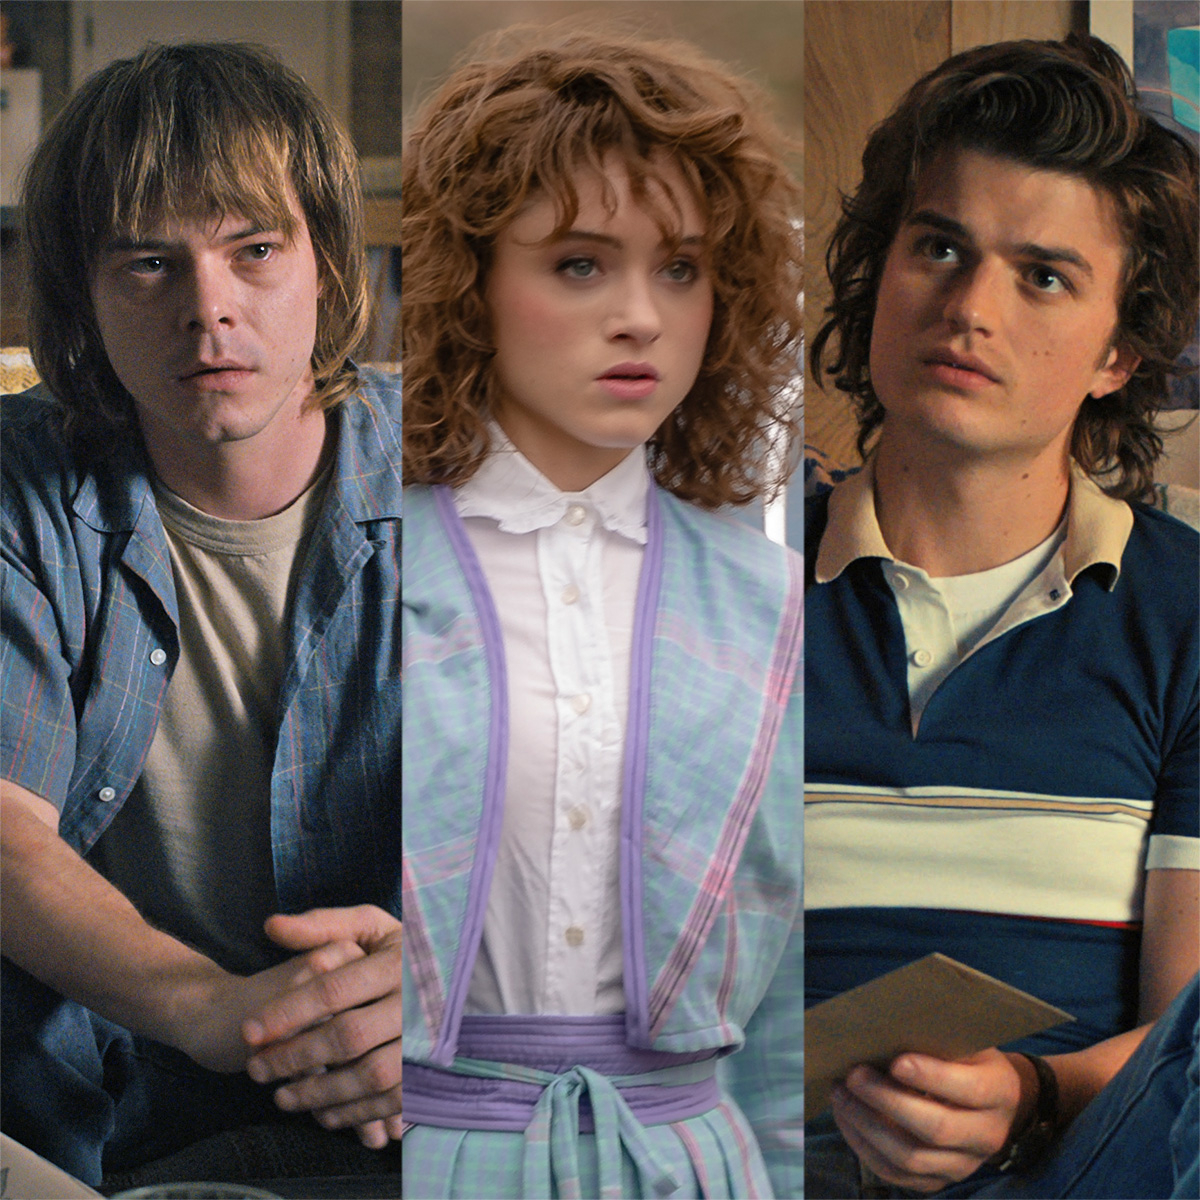 Who will die in Stranger Things 4 Volume 2? - Page 2